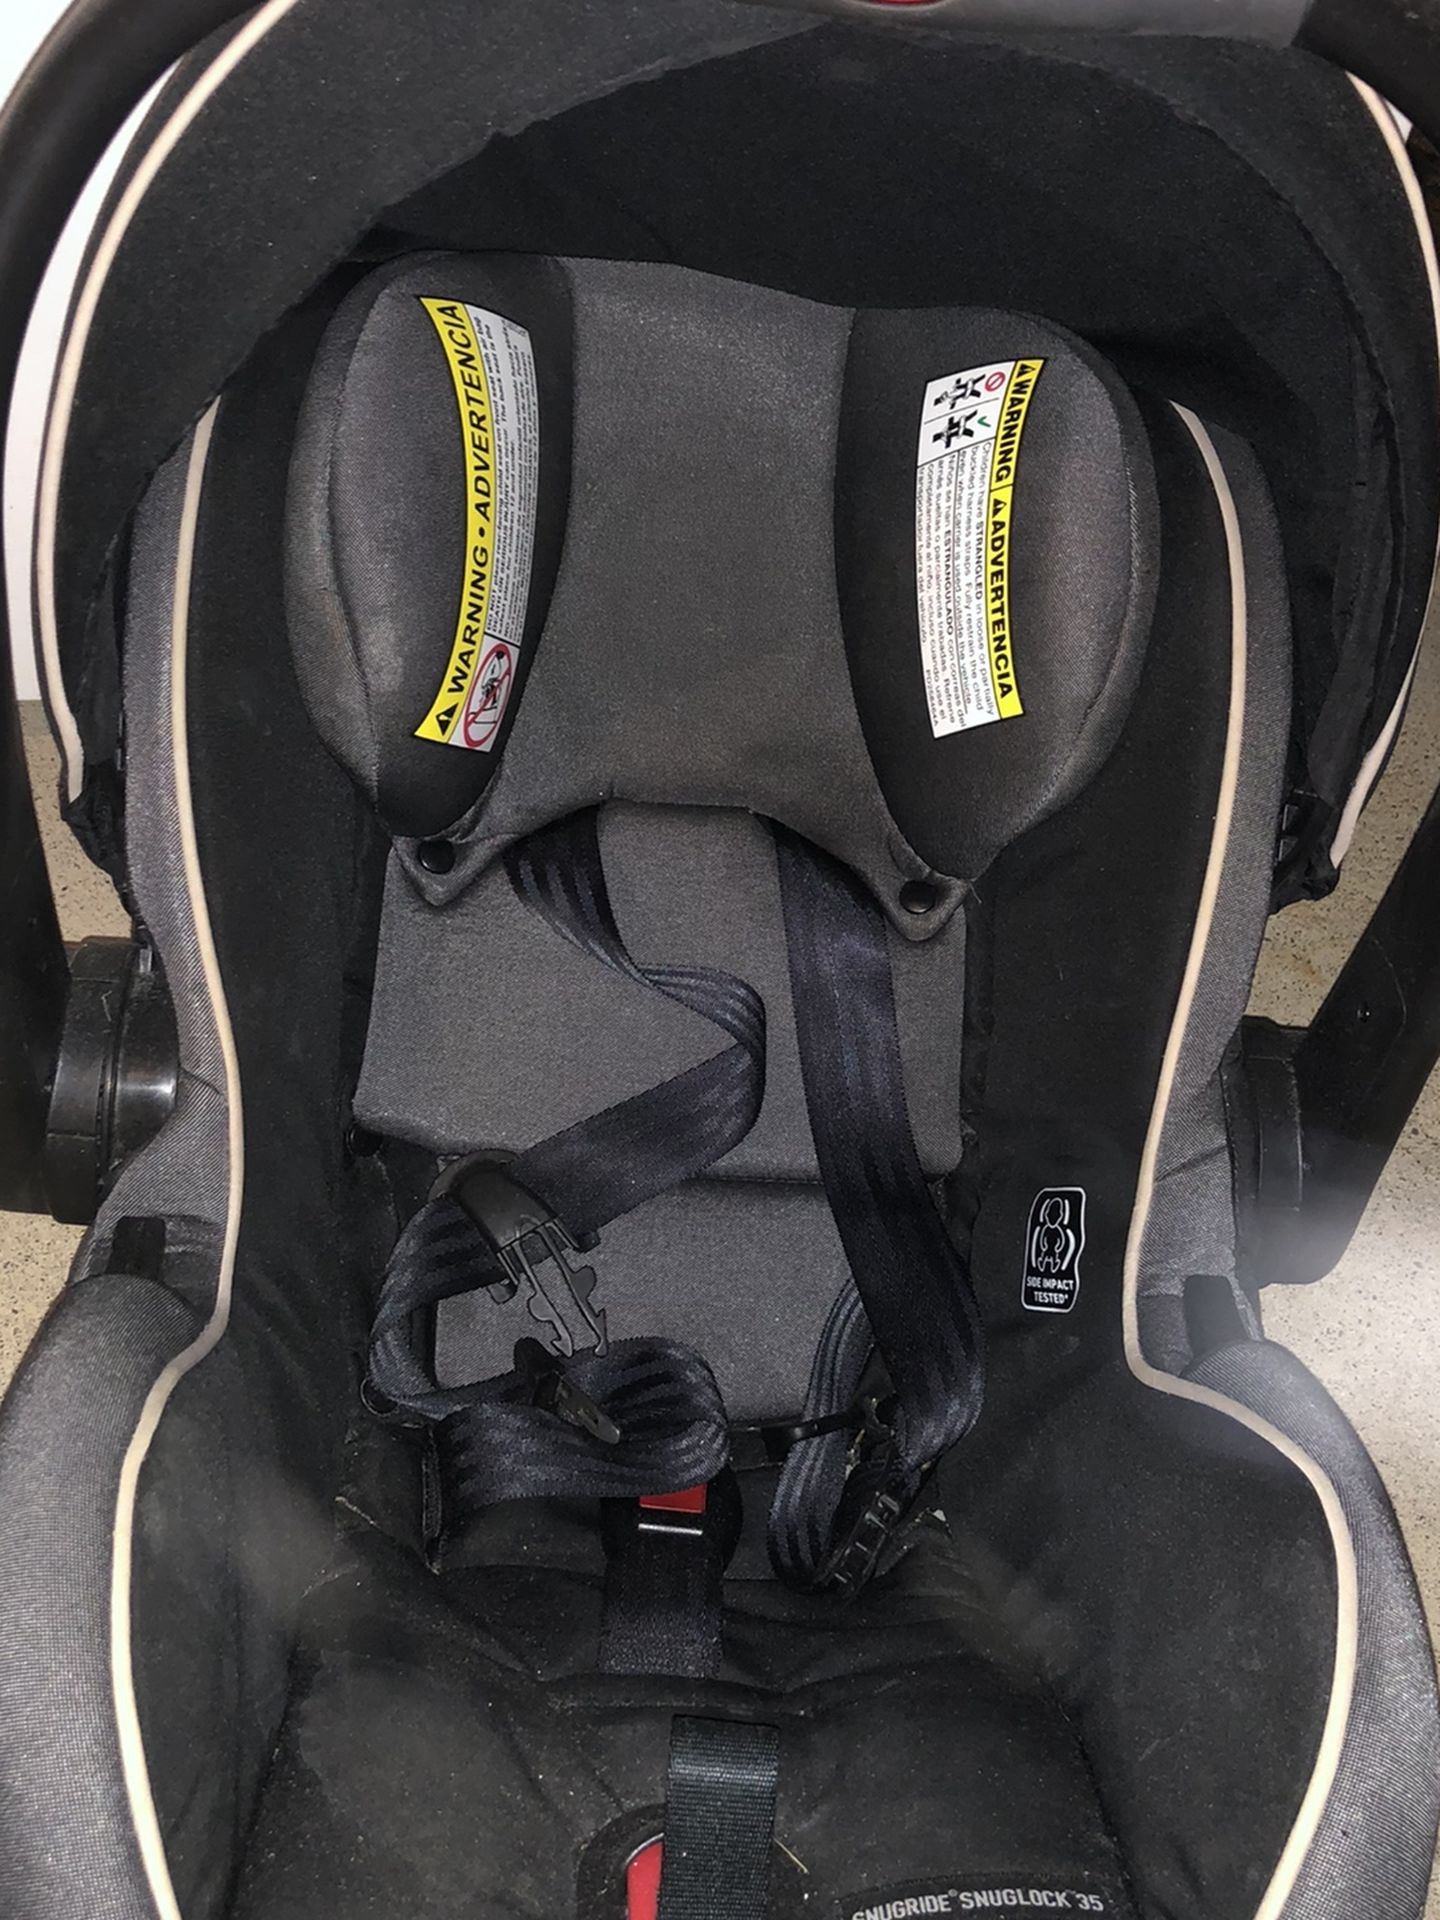 Graco snap and go infant carrier